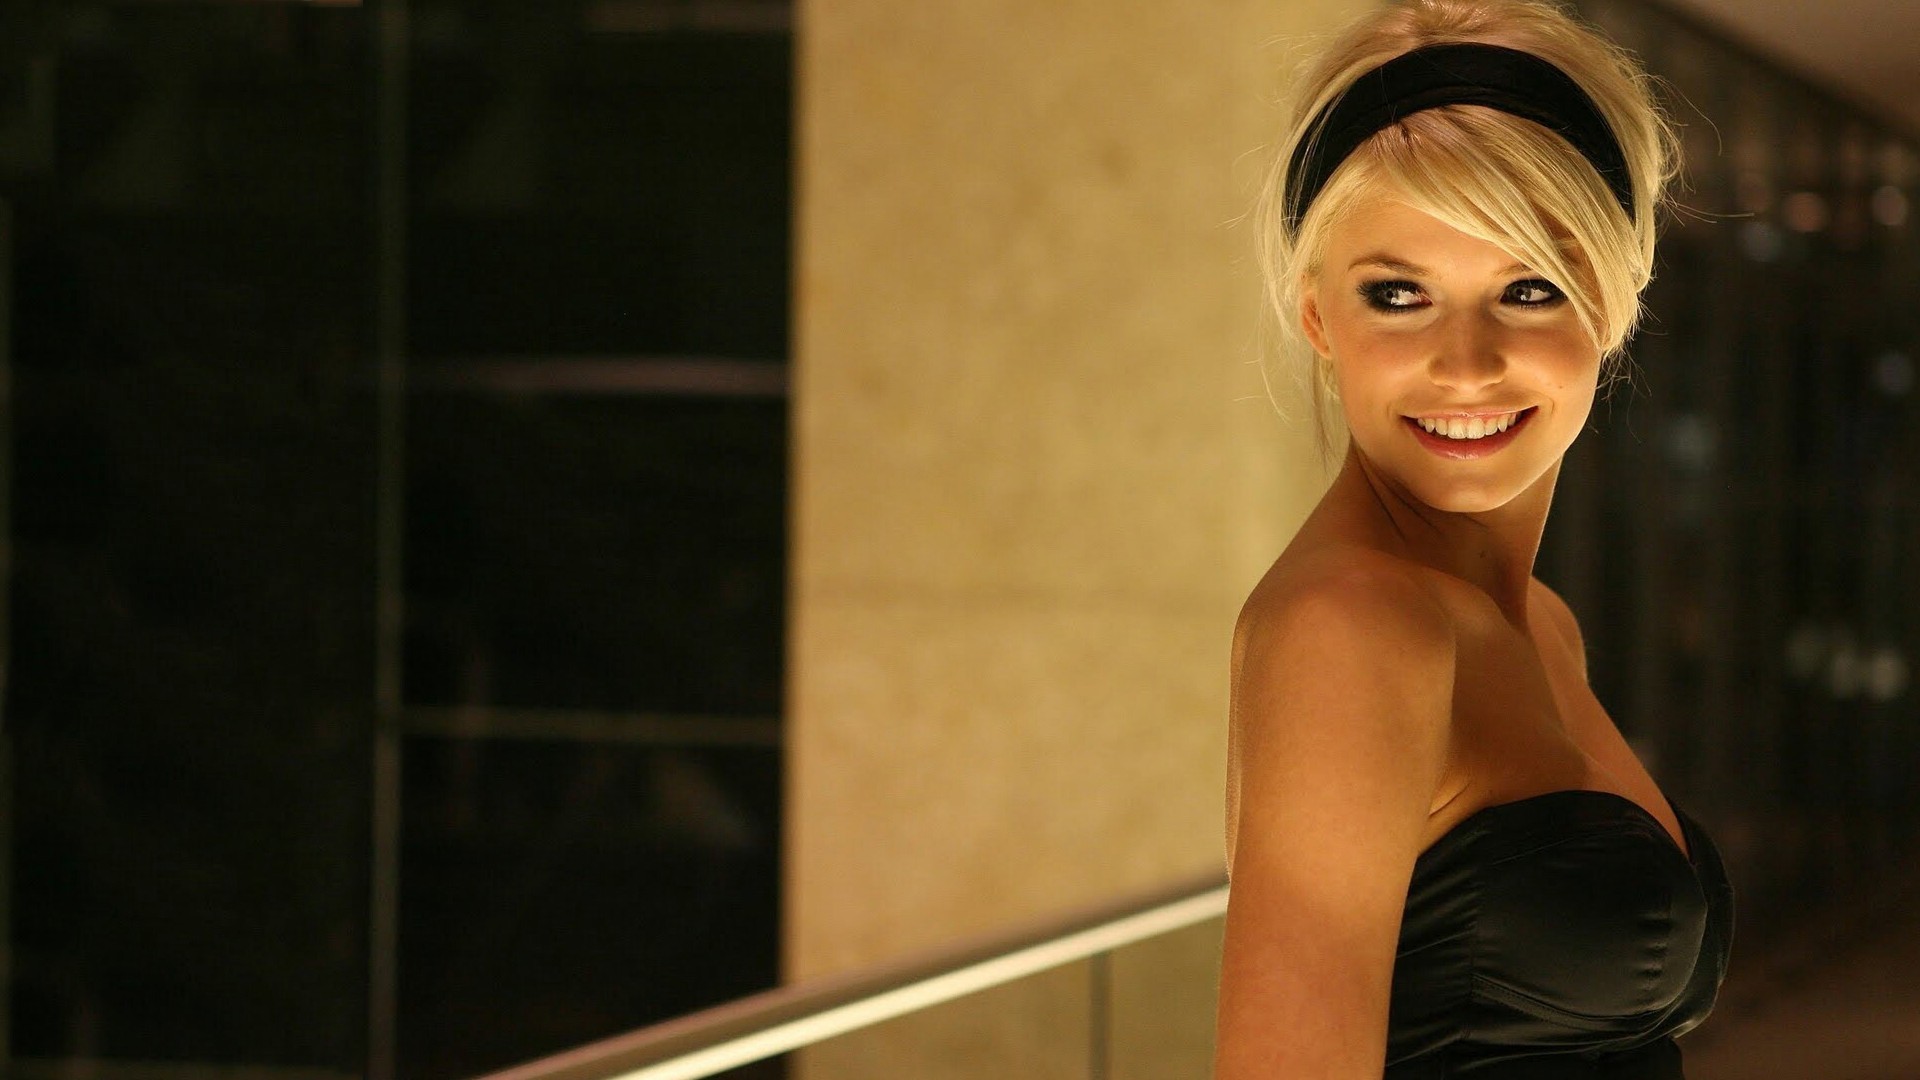 Lena Gercke Hair Band Face Smiling Looking Away Black Clothing Bare Shoulders 1920x1080